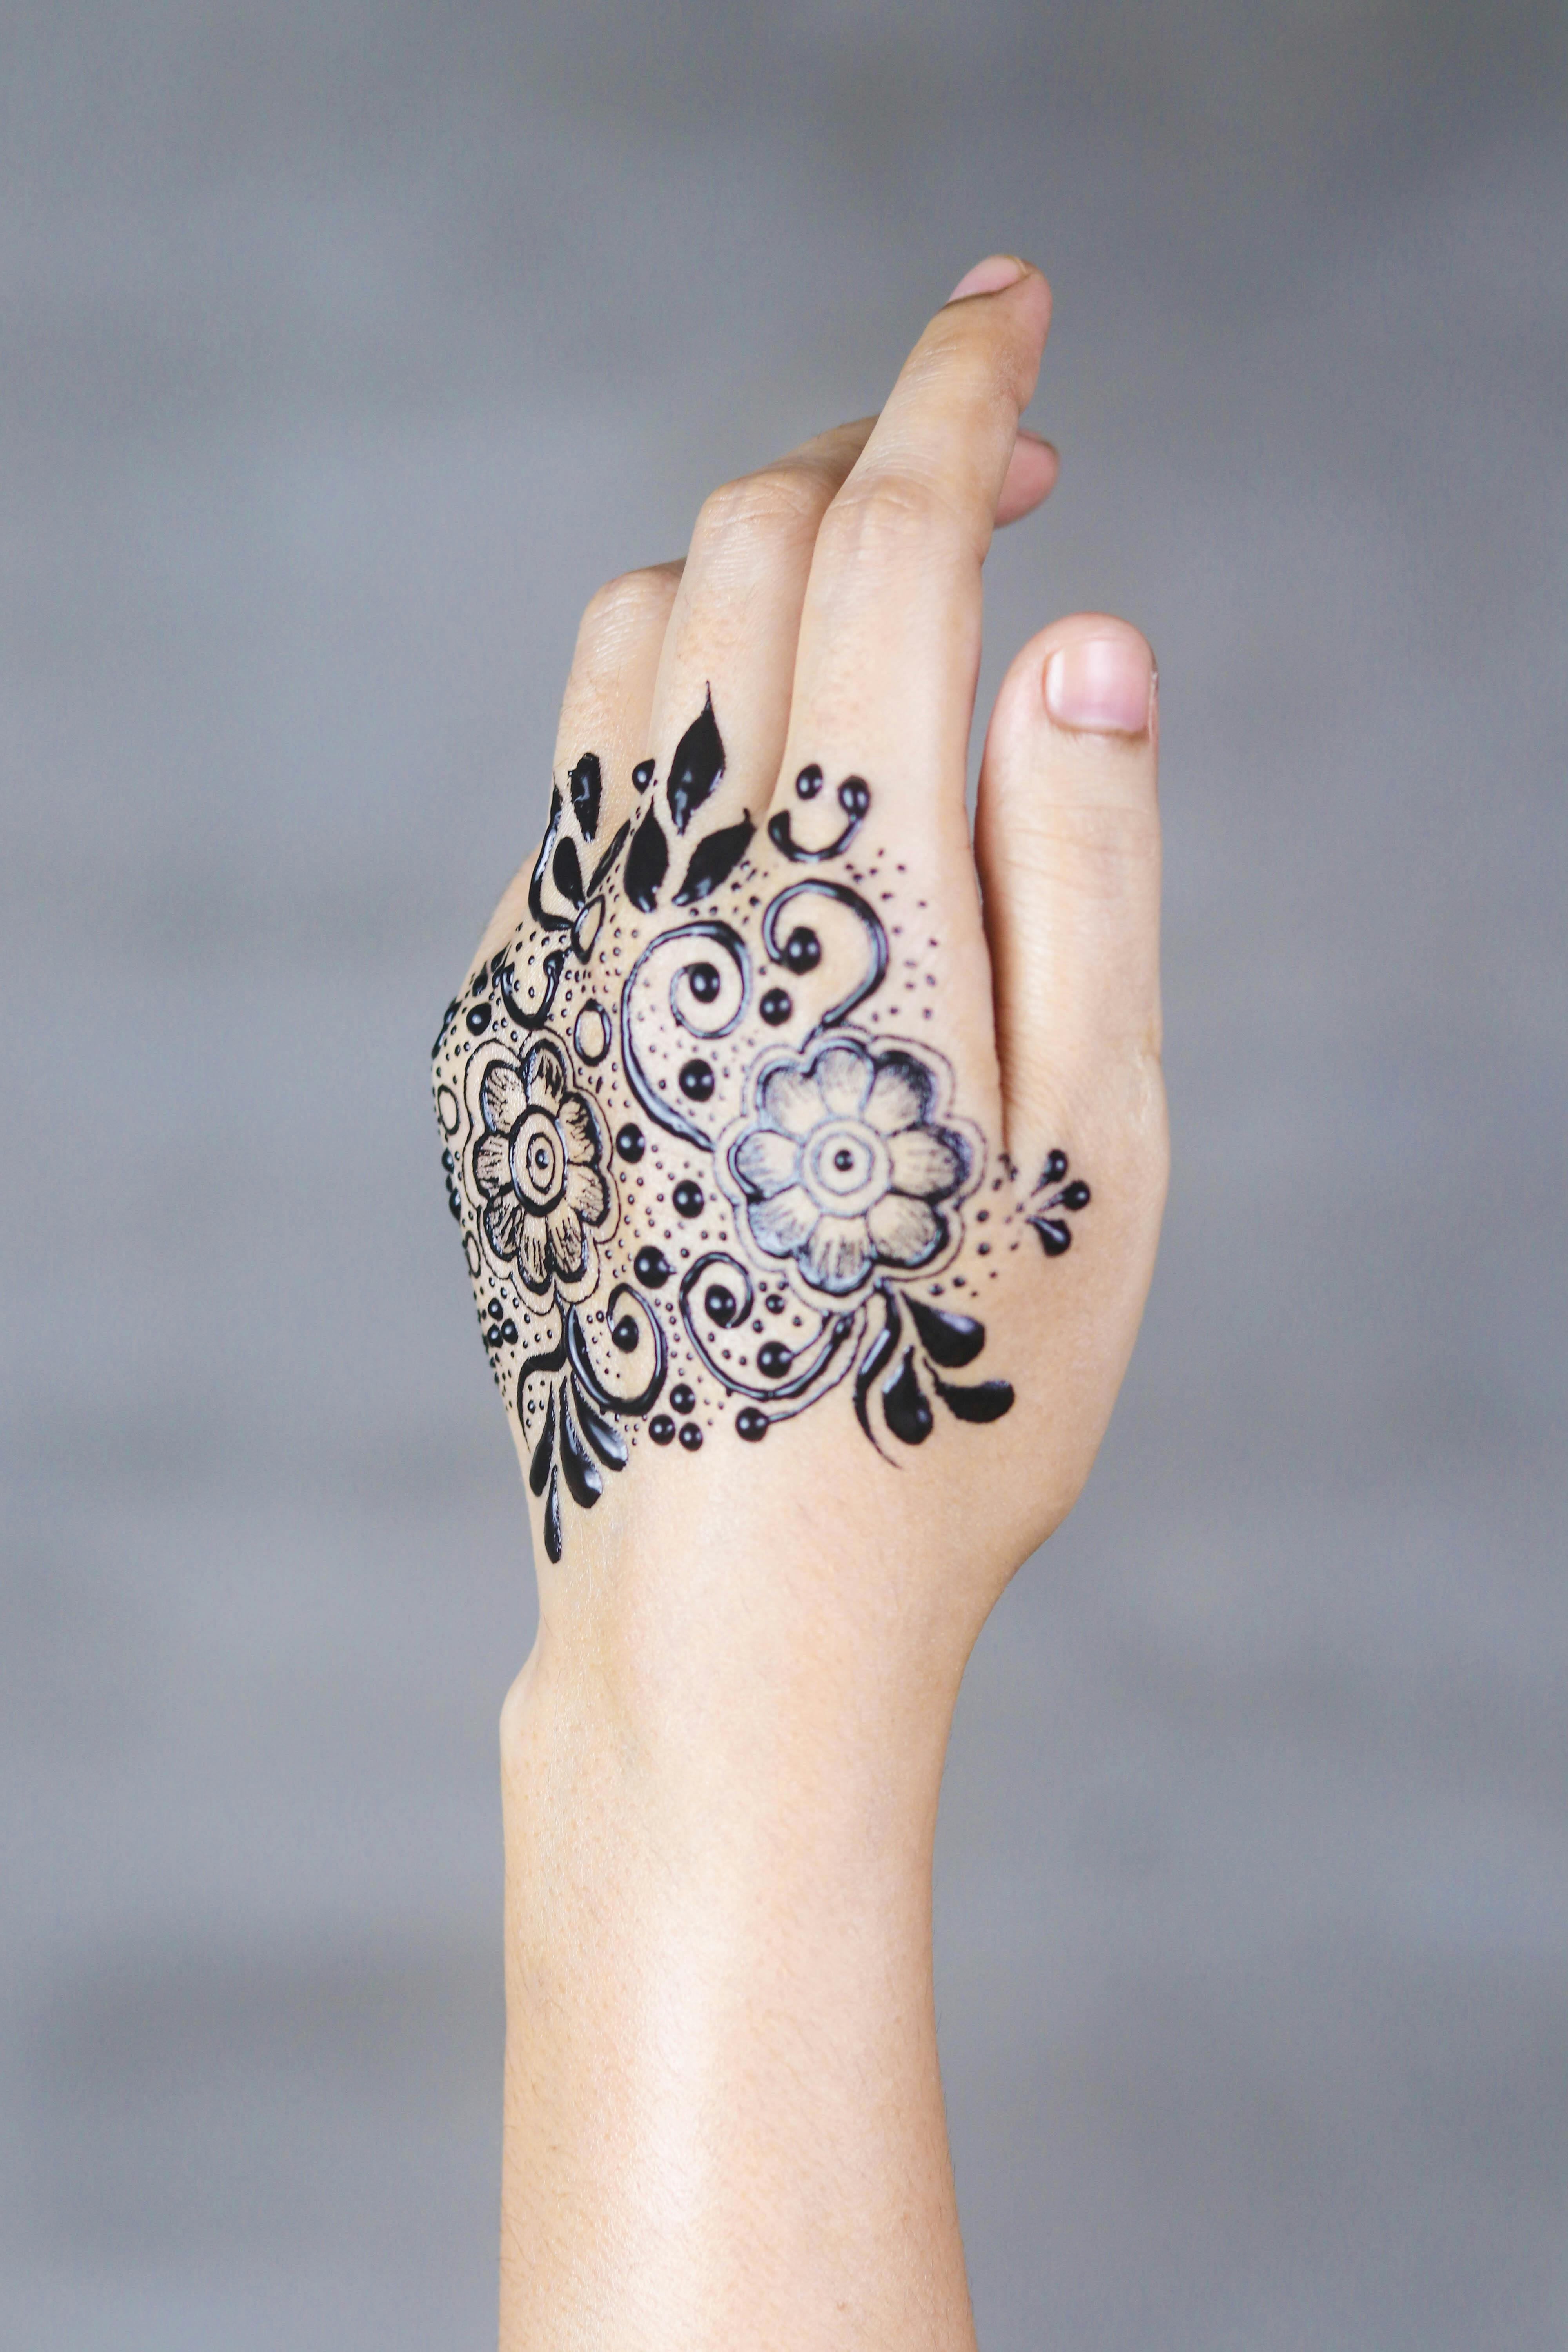 8100 Henna Tattoo Hand Stock Photos Pictures  RoyaltyFree Images   iStock